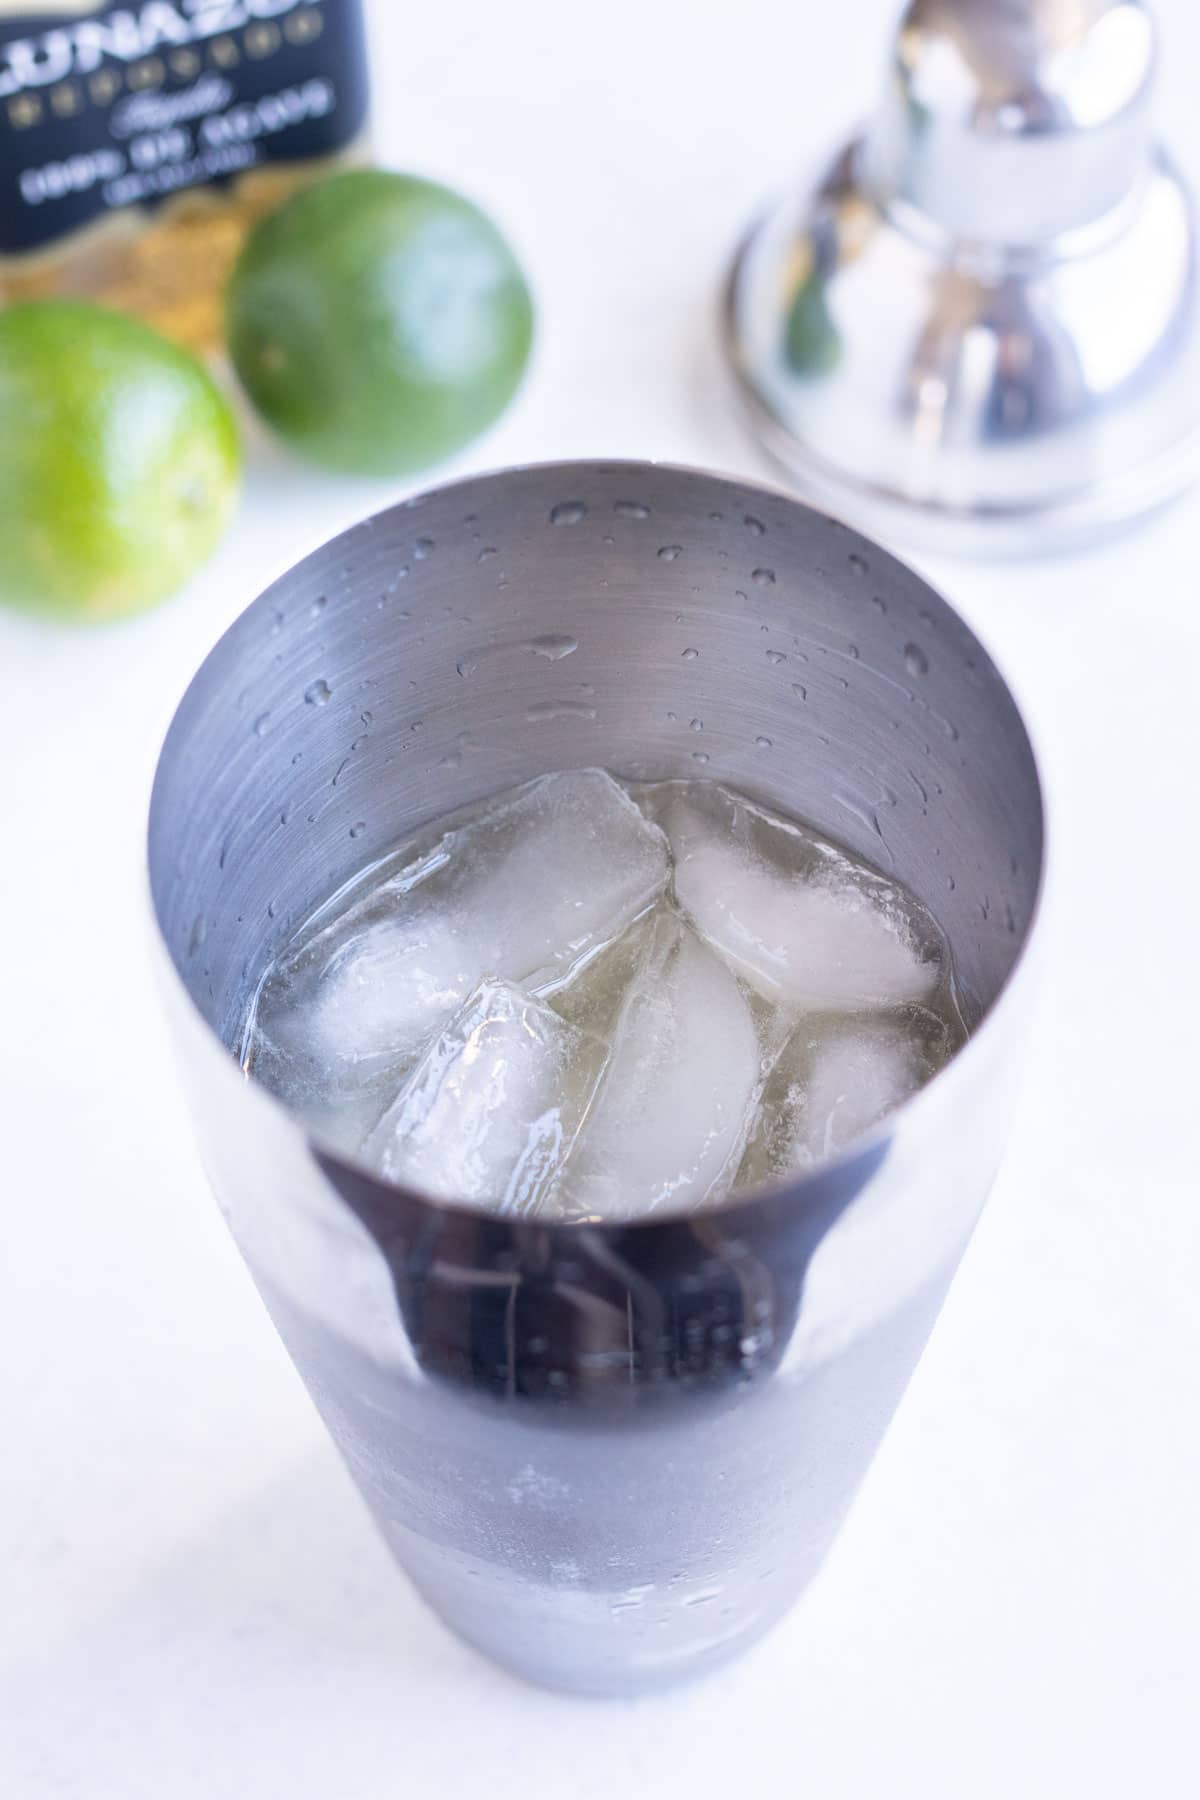 Ice and drink ingredients are add to the shaker.